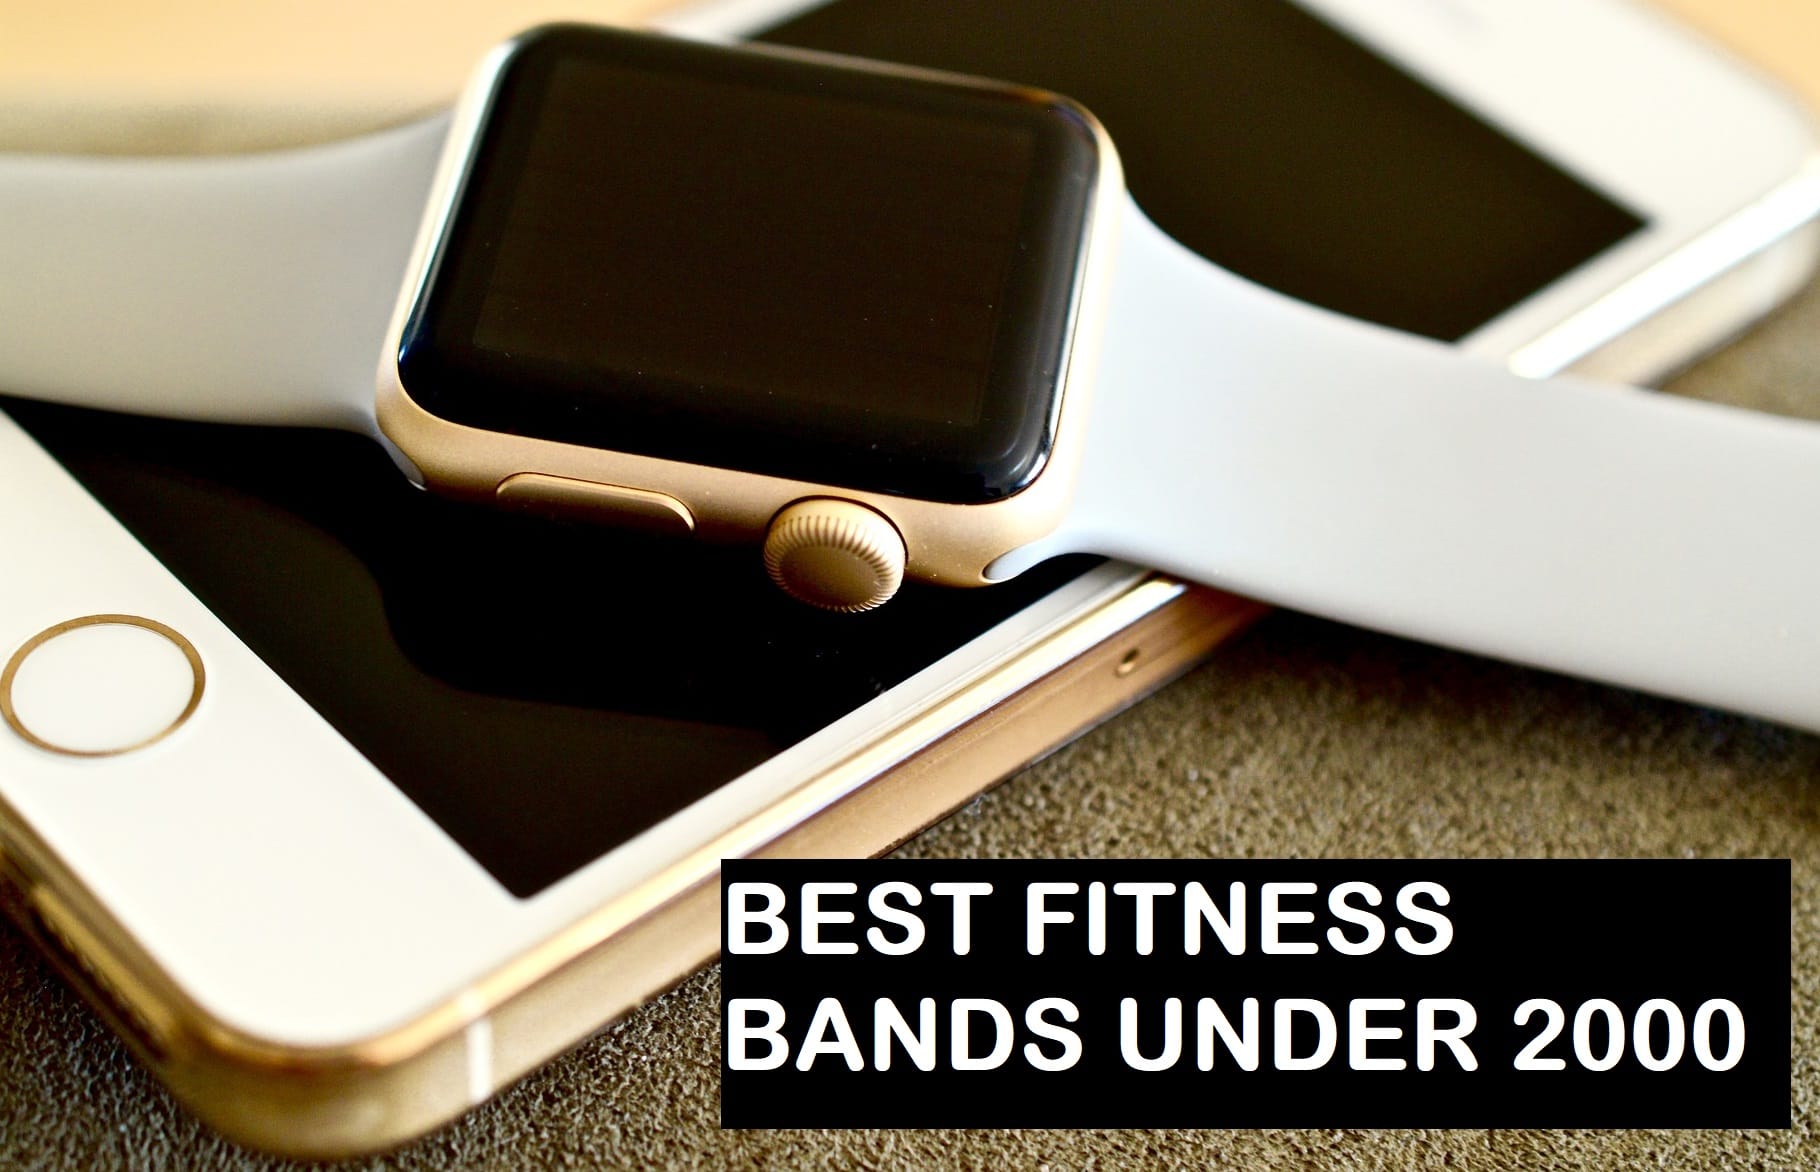 6 best fitness bands under 2000